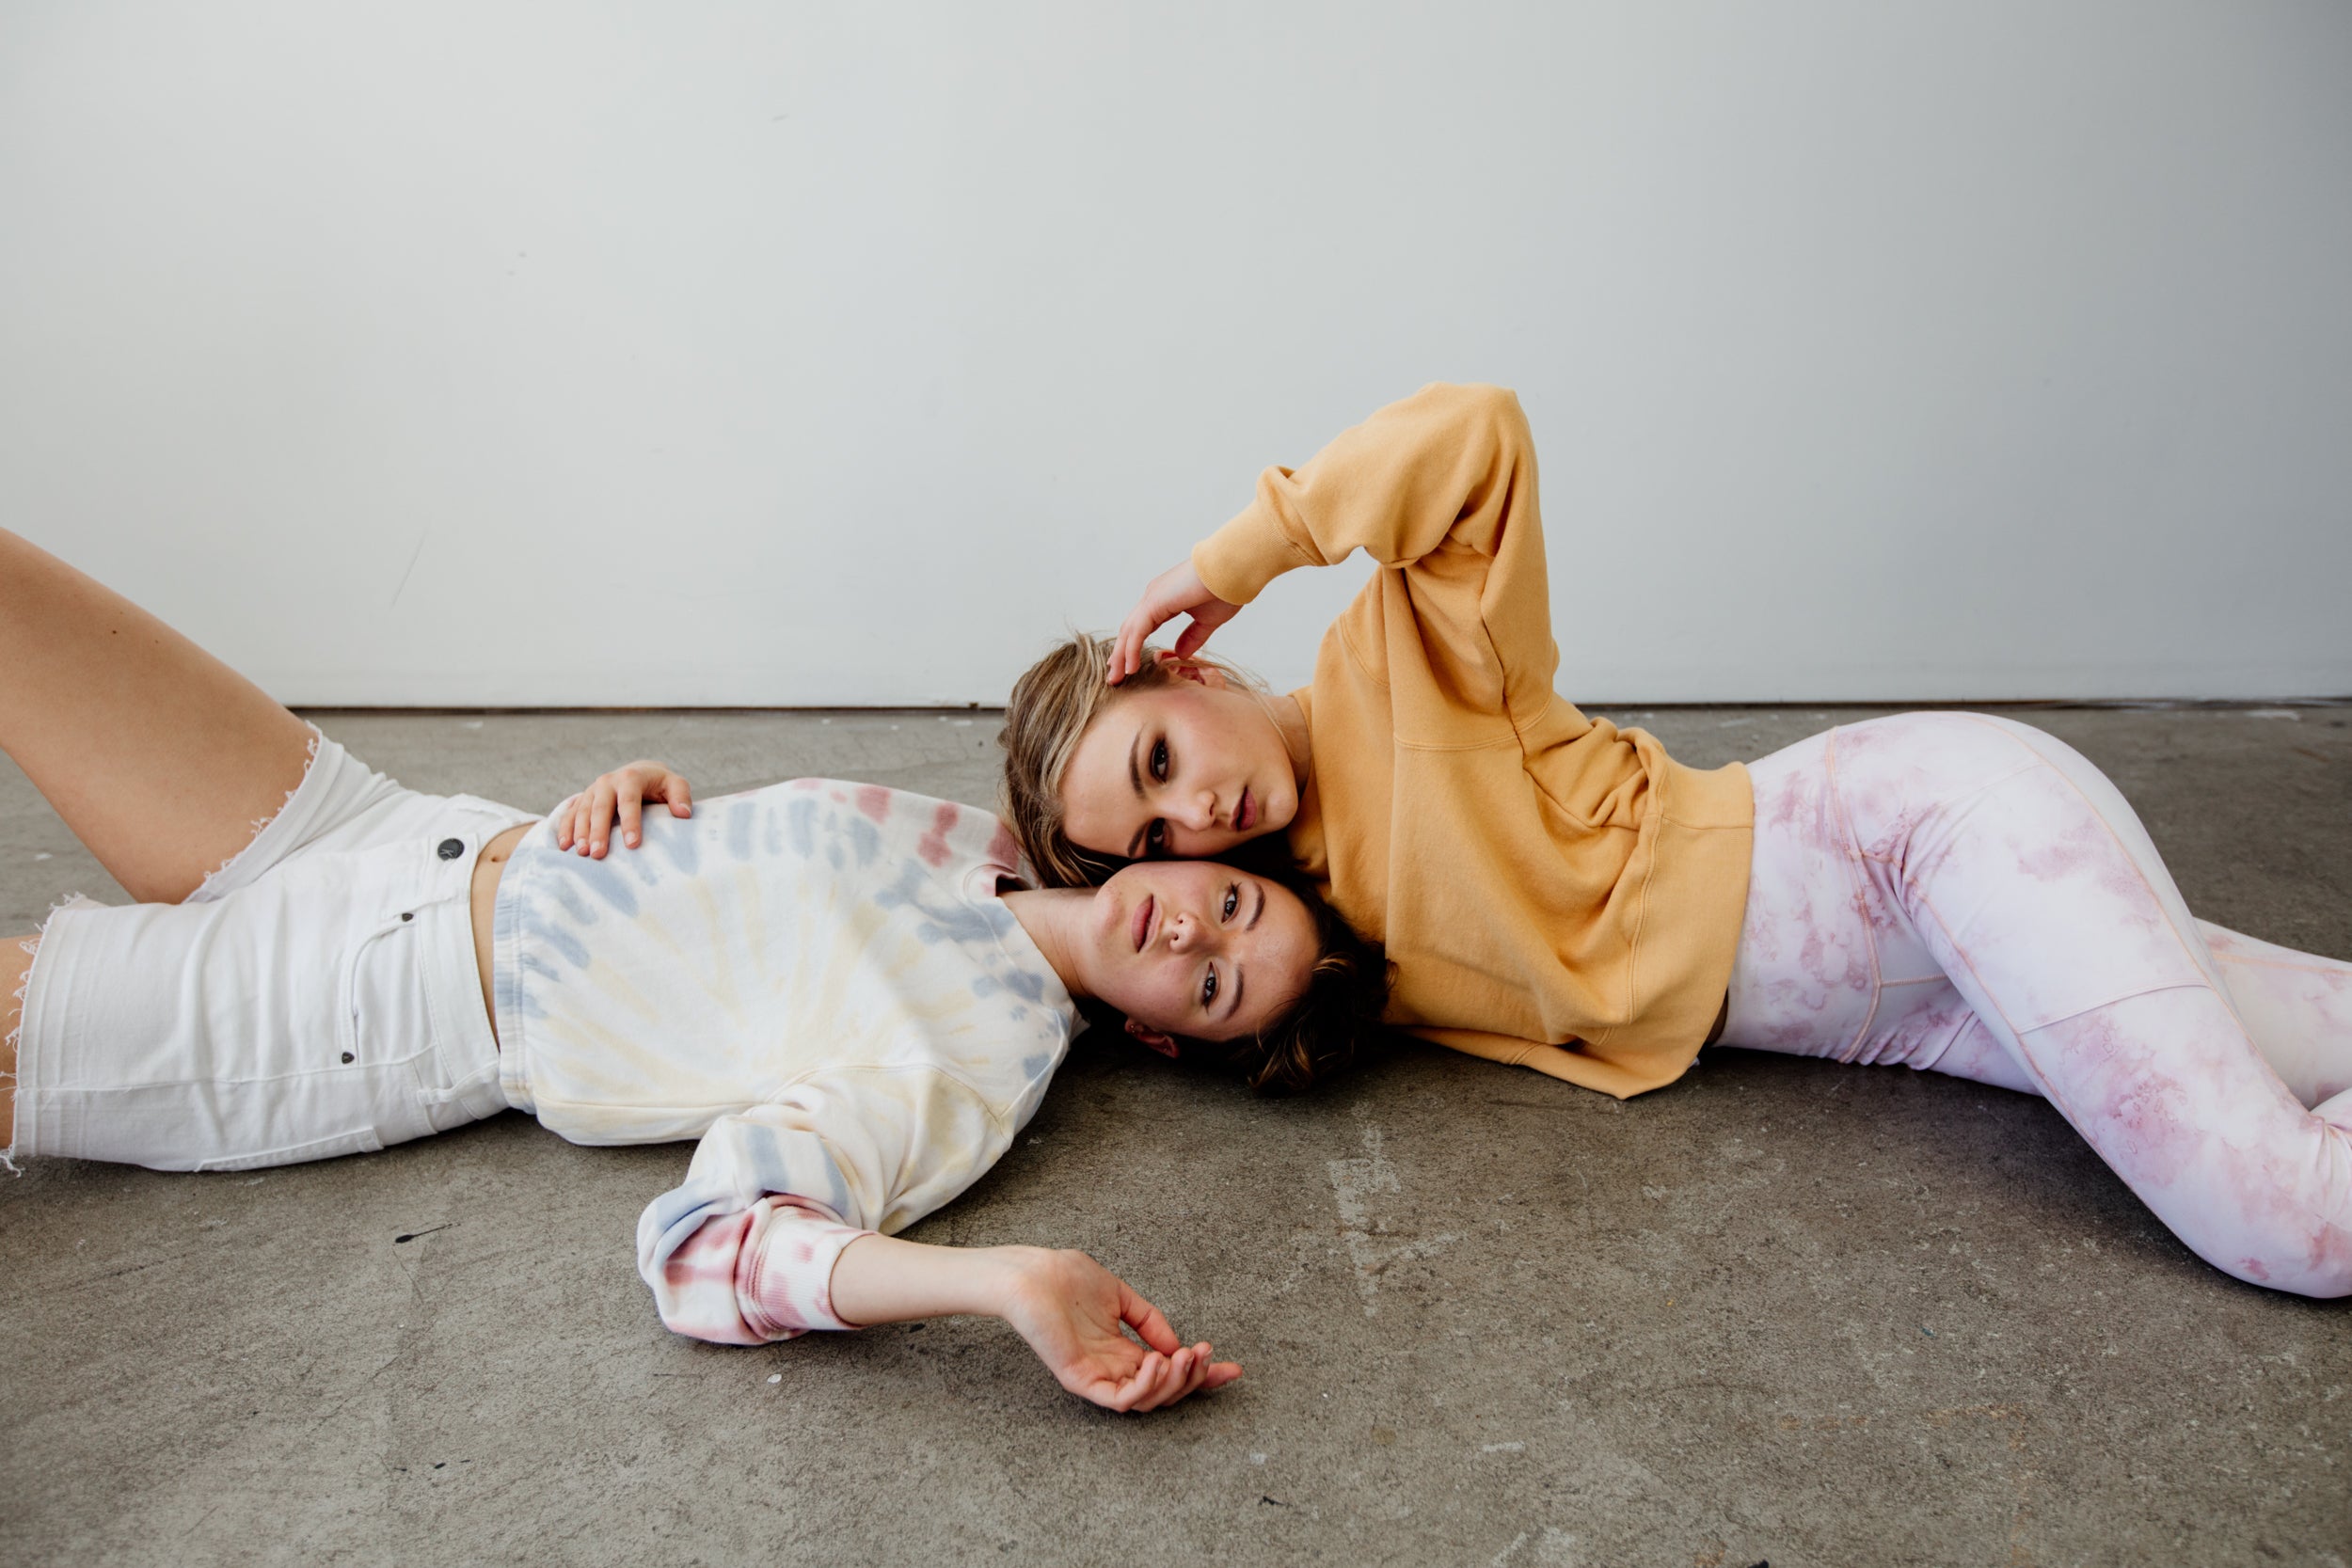 Two women lie on the floor